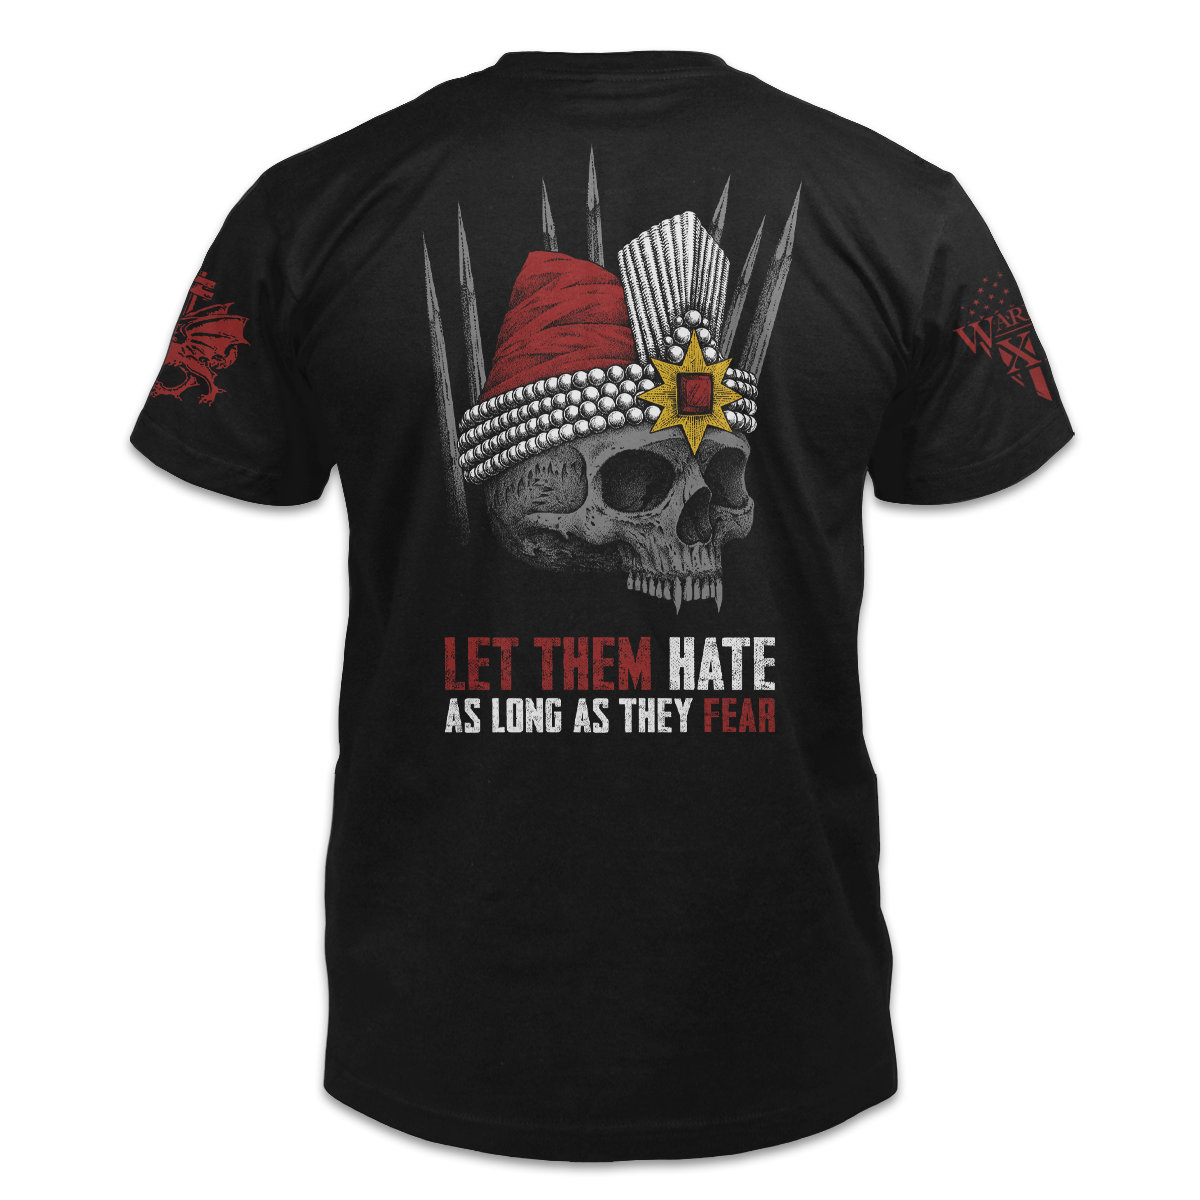 A black t-shirt that pays tribute to one of the most feared men in history; Vlad Dracula.The shirt has the words "Let Them Hate As Long As They Fear" with a Vlad skull printed on the back of the shirt.